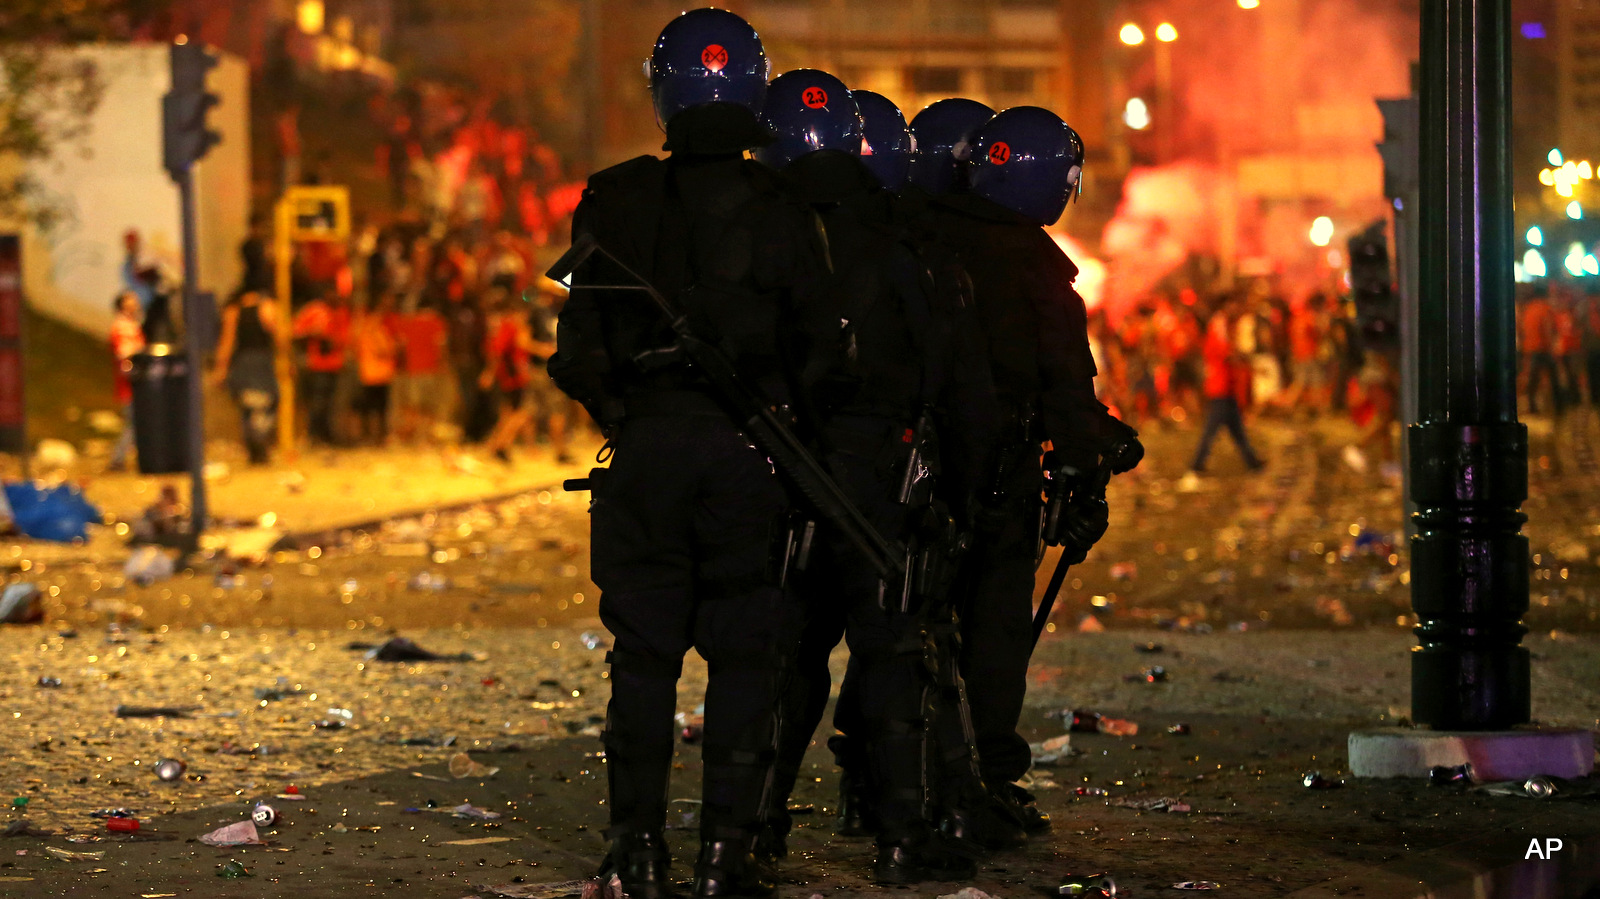 Portuguese anti-riot policemen in full gear stand guard during clashes with Benfica supporters after Benfica won the Portuguese league championship, at the Marques Pombal square, in Lisbon, Sunday, May 17, 2015. Benfica clinched its 34th league title after a 0-0 draw against Vitoria Guimaraes with one round left to play.